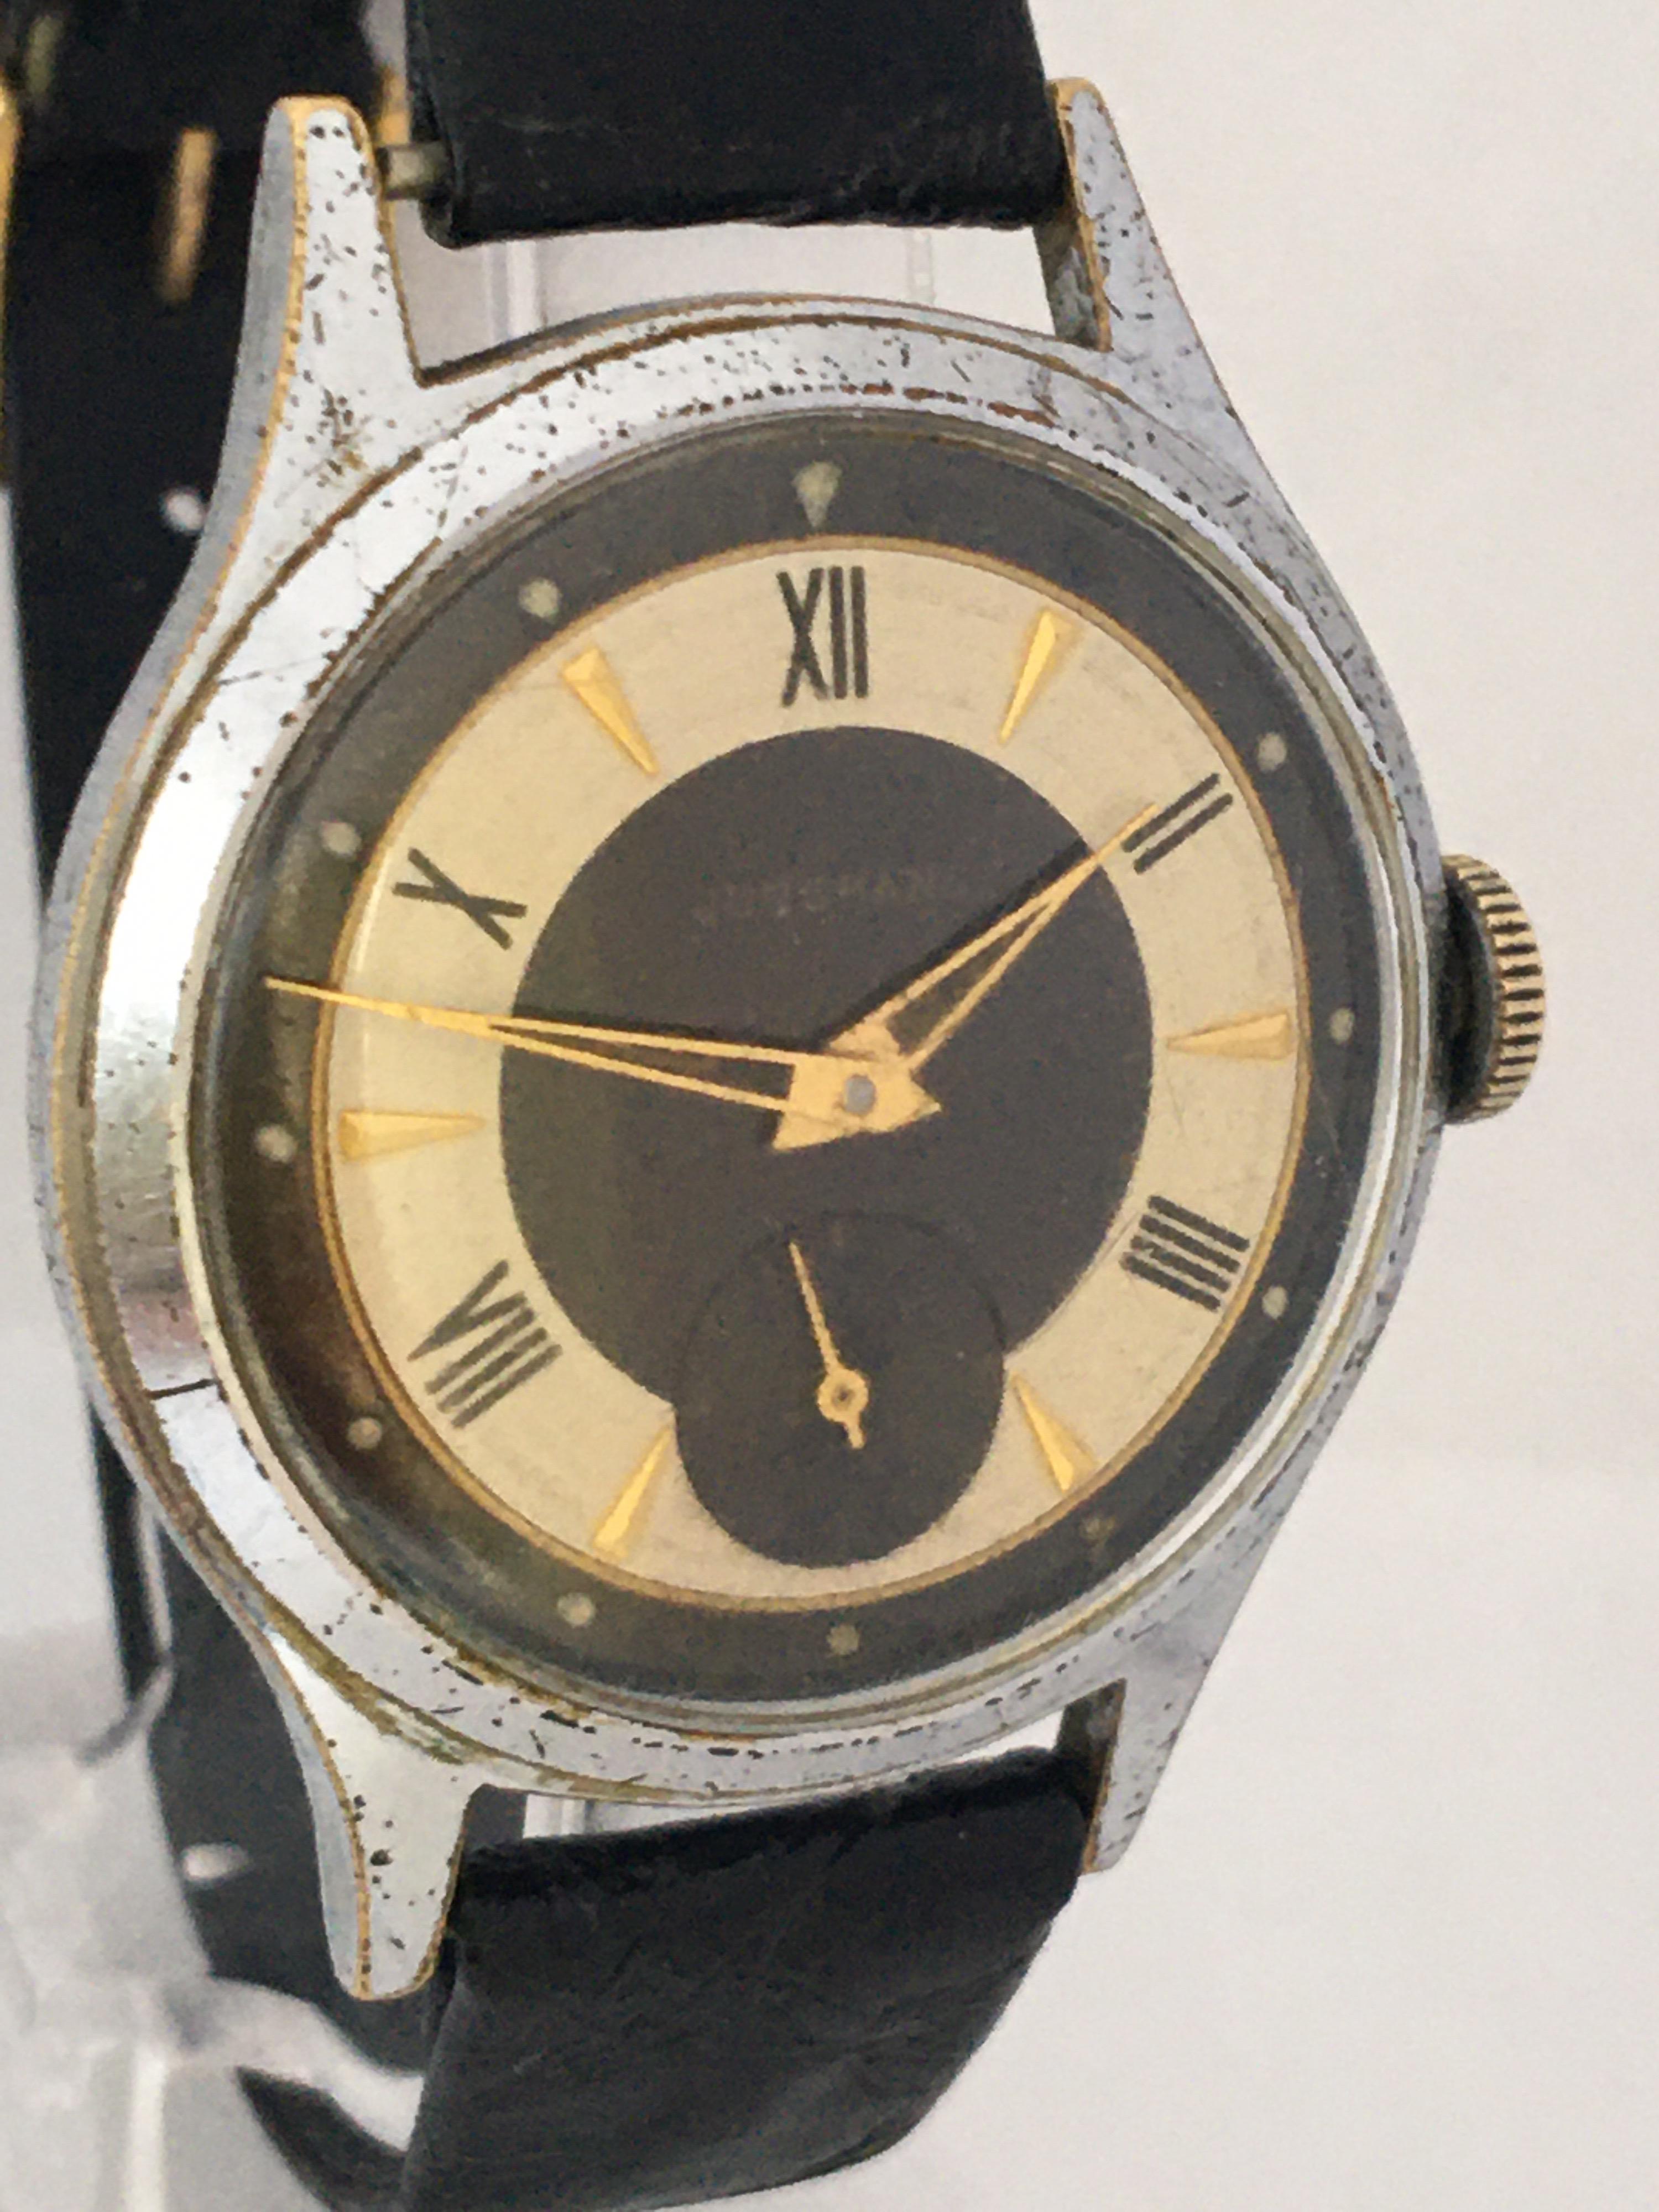 This beautiful vintage hand winding watch is working and it is ticking well but I cannot guarantee the time accuracy. Visible signs of ageing and wear with some scratches on the glass and on the watch case as shown. The silver plated watch case is a